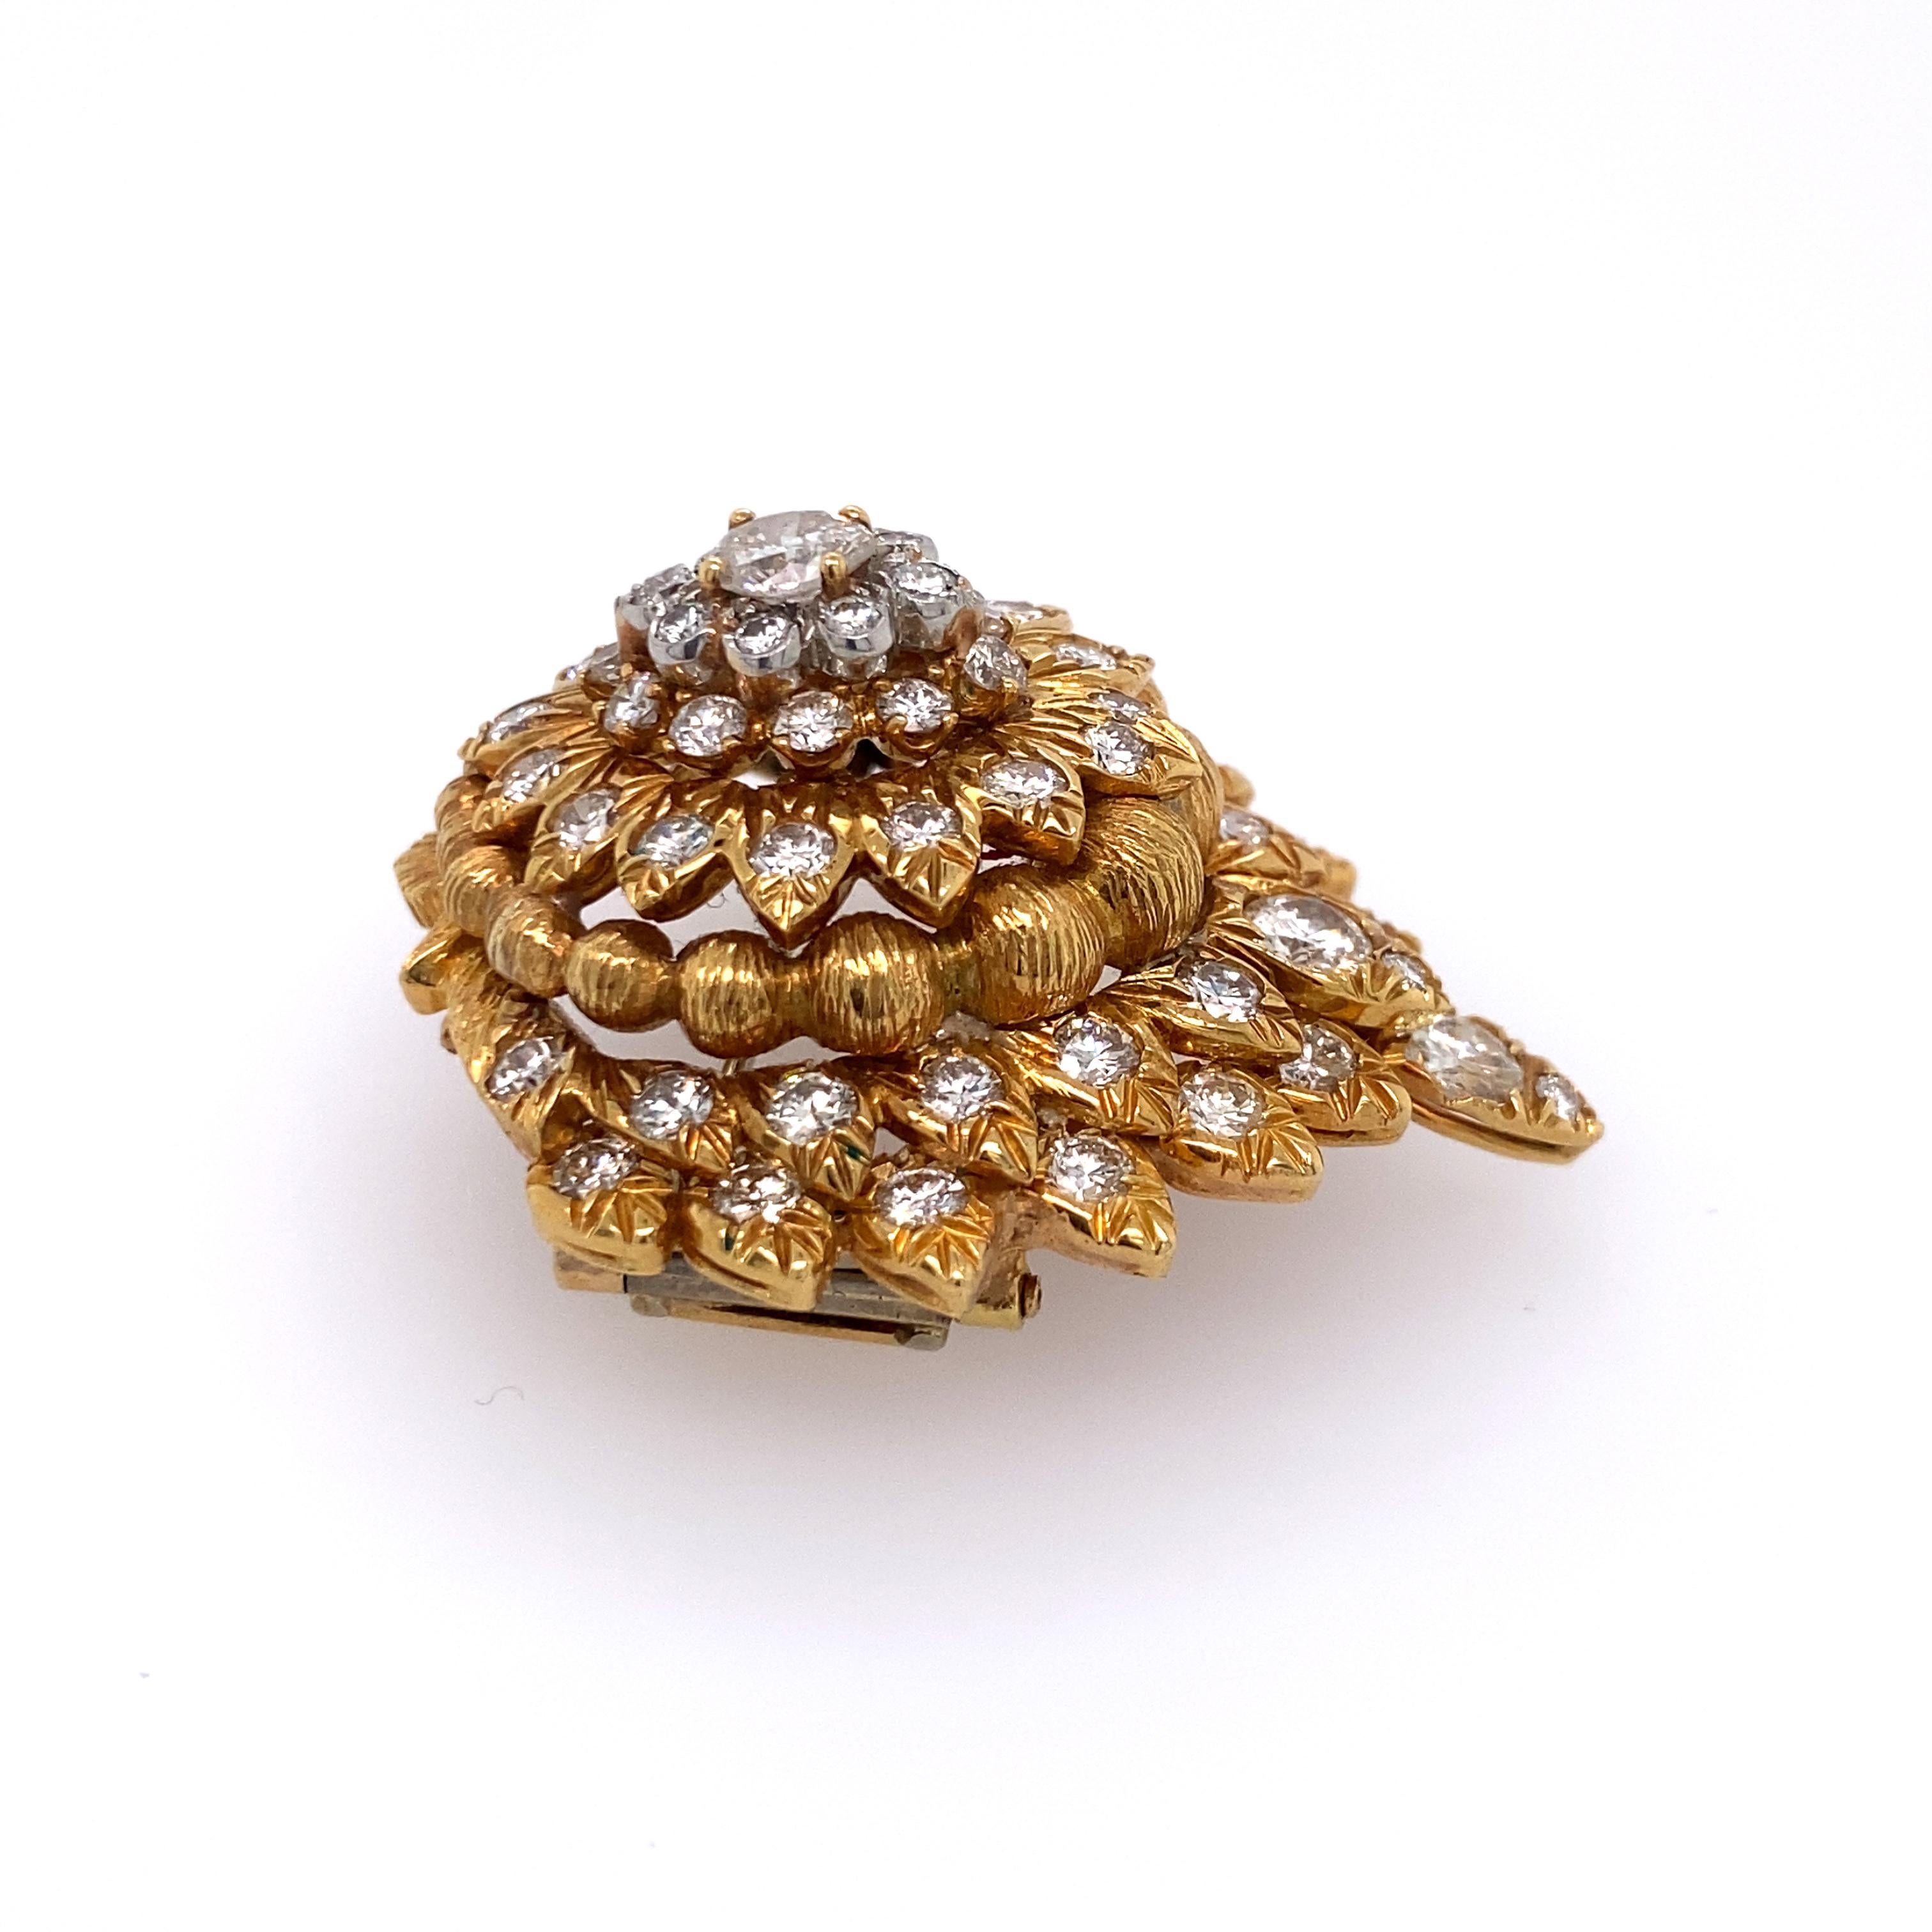 Signed David Webb 18kt yellow gold and diamond brooch. Central pear-shaped diamond measures approx. 4.0mm x 5.0mm or approx. 0.35cttw. Total approx. weight is 15.0 dwt. Dimensions: brooch measures approx. 1.38